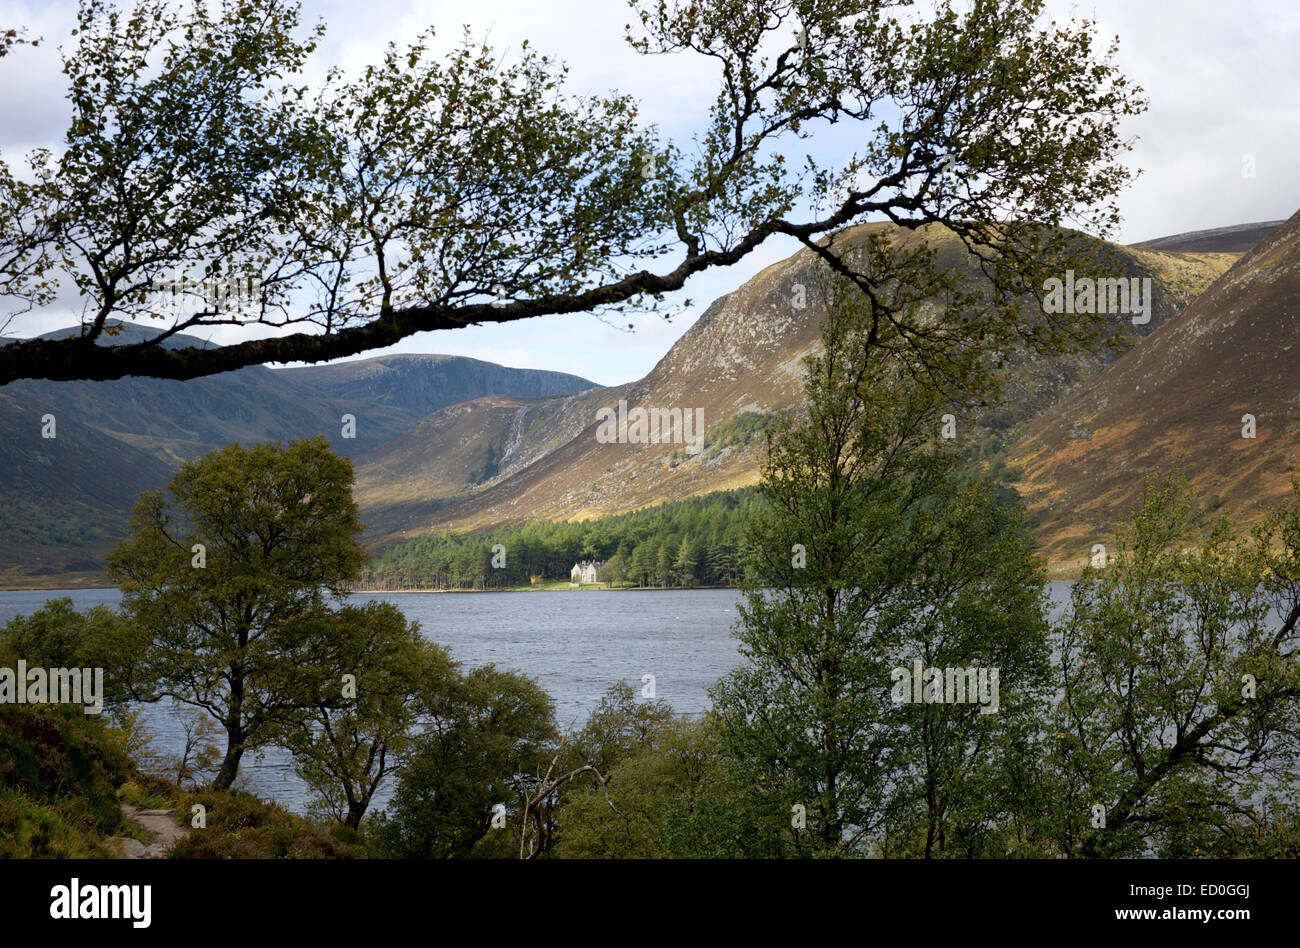 A framed view of Glas allt Shiel on the banks of Loch Muick in the Cairngorms National Park. Stock Photo